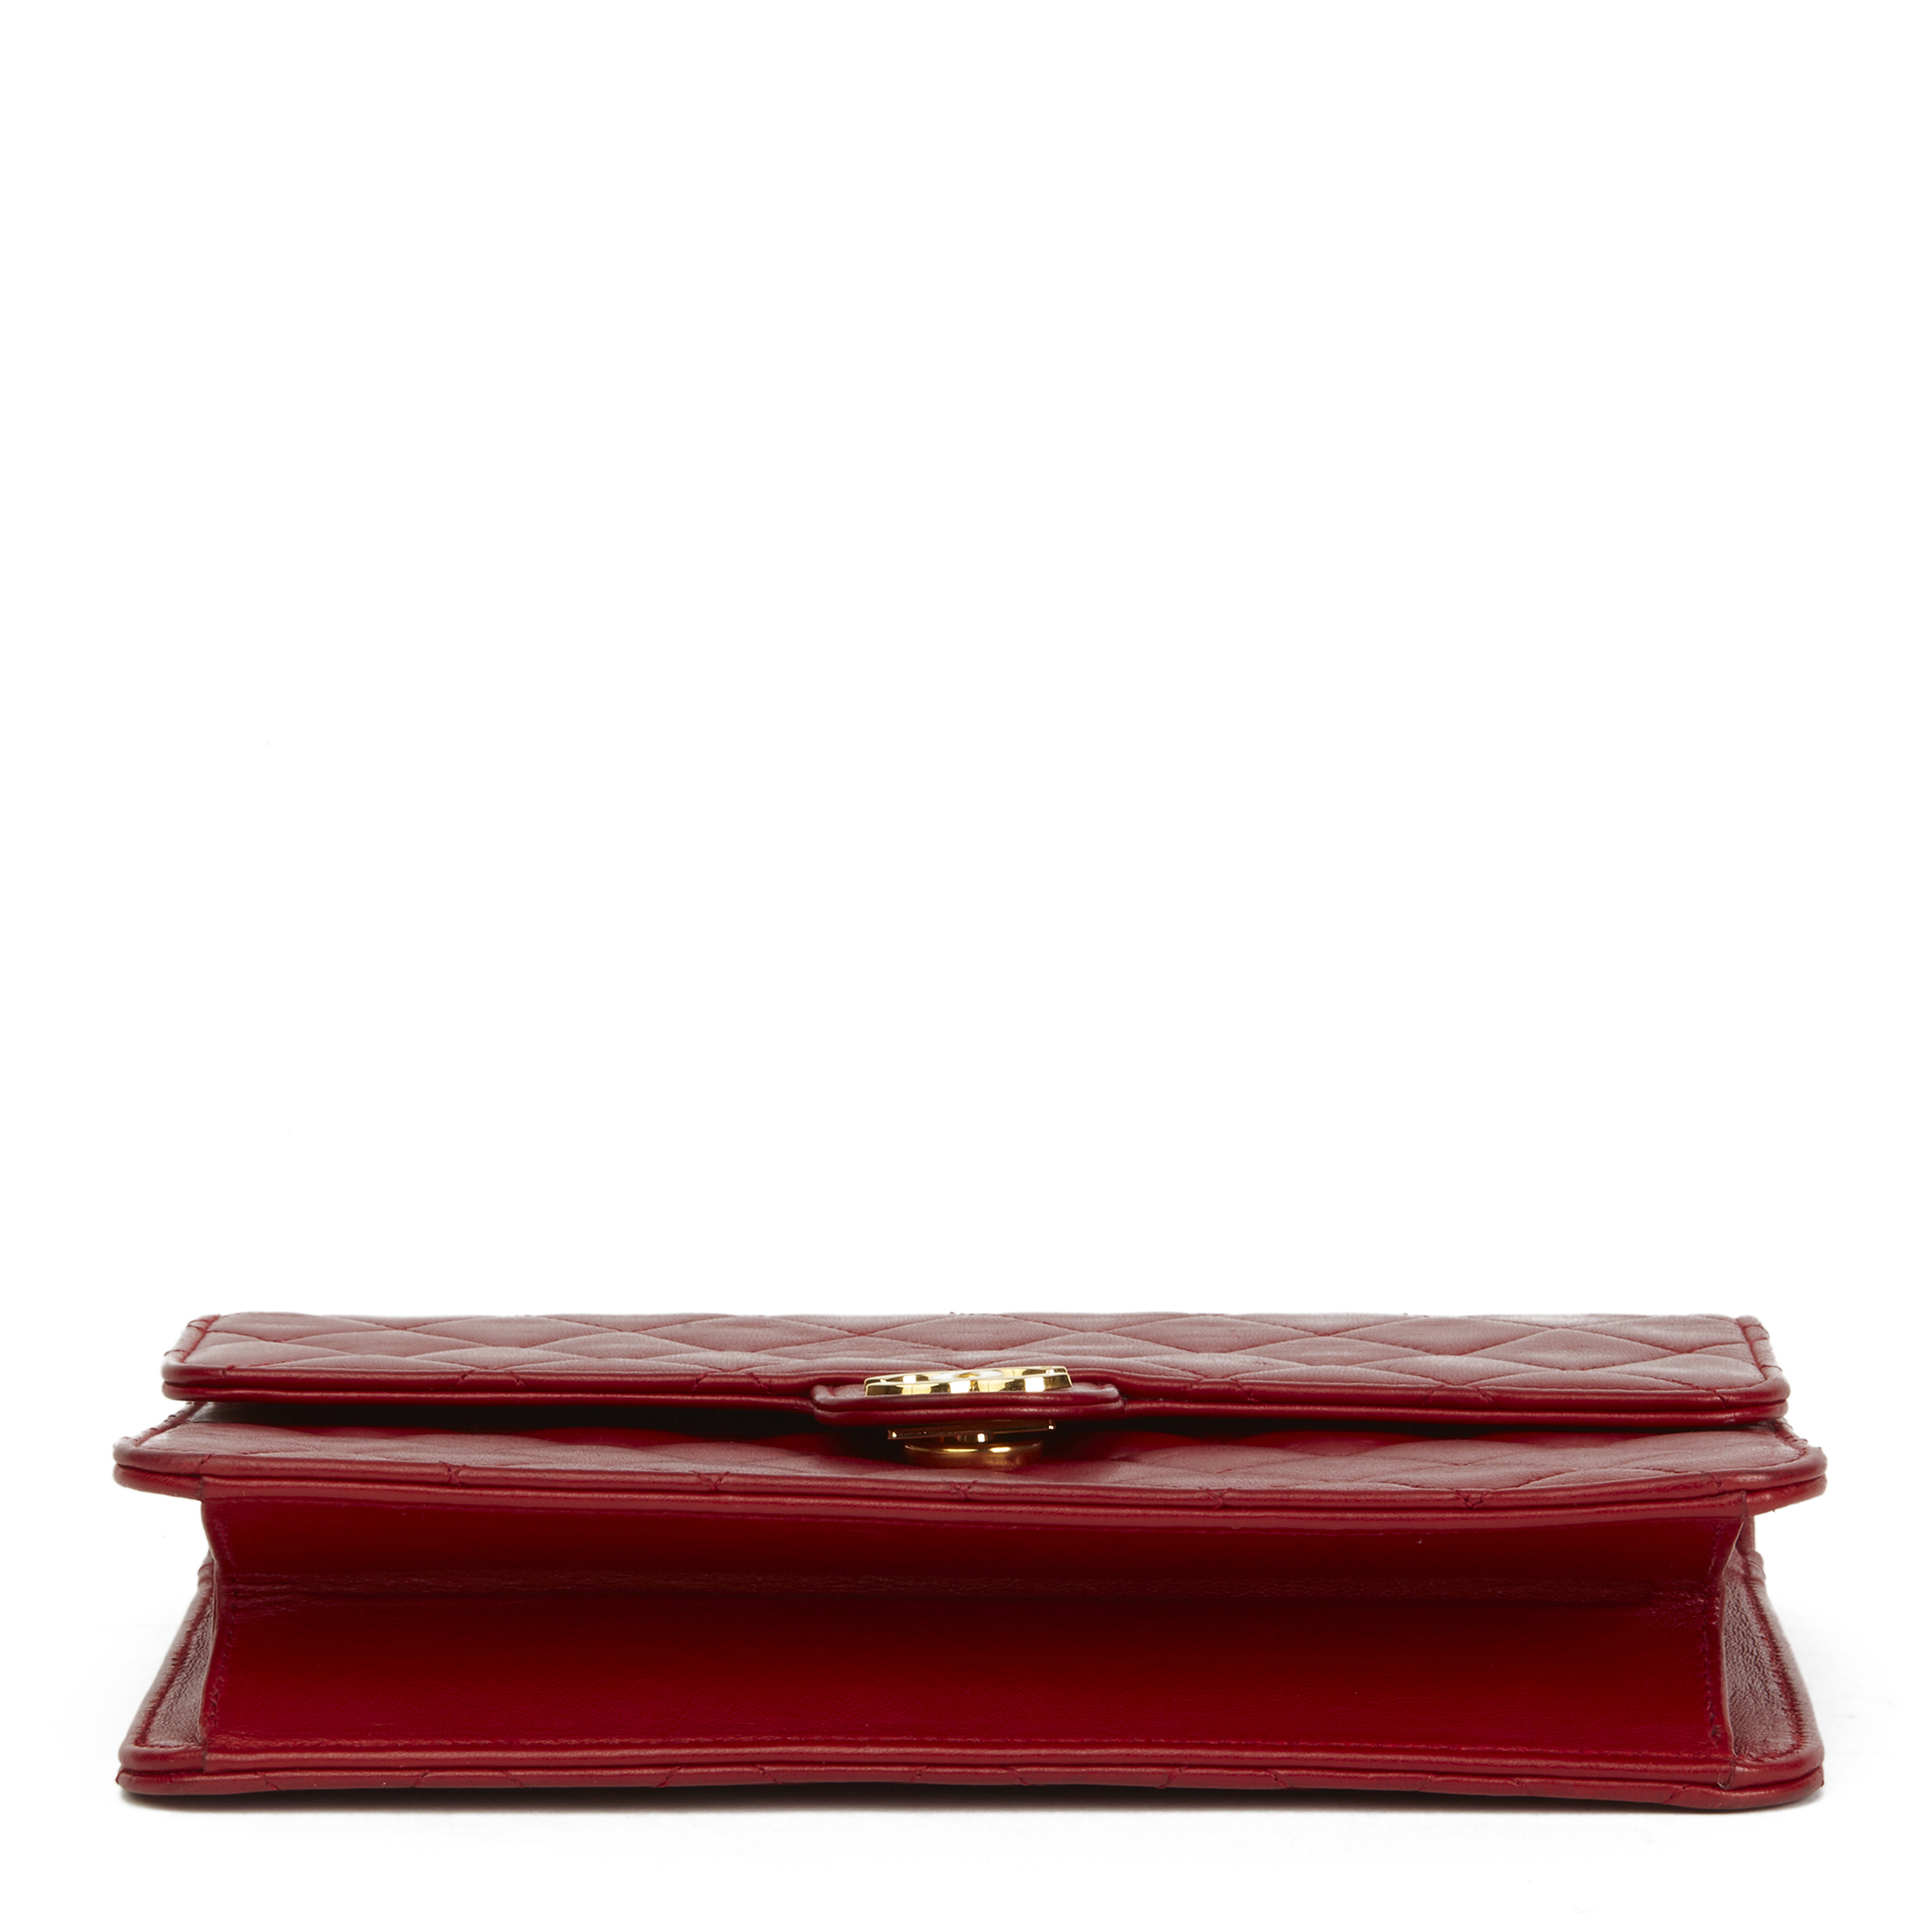 Chanel Small Classic Single Flap Bag - Image 5 of 8